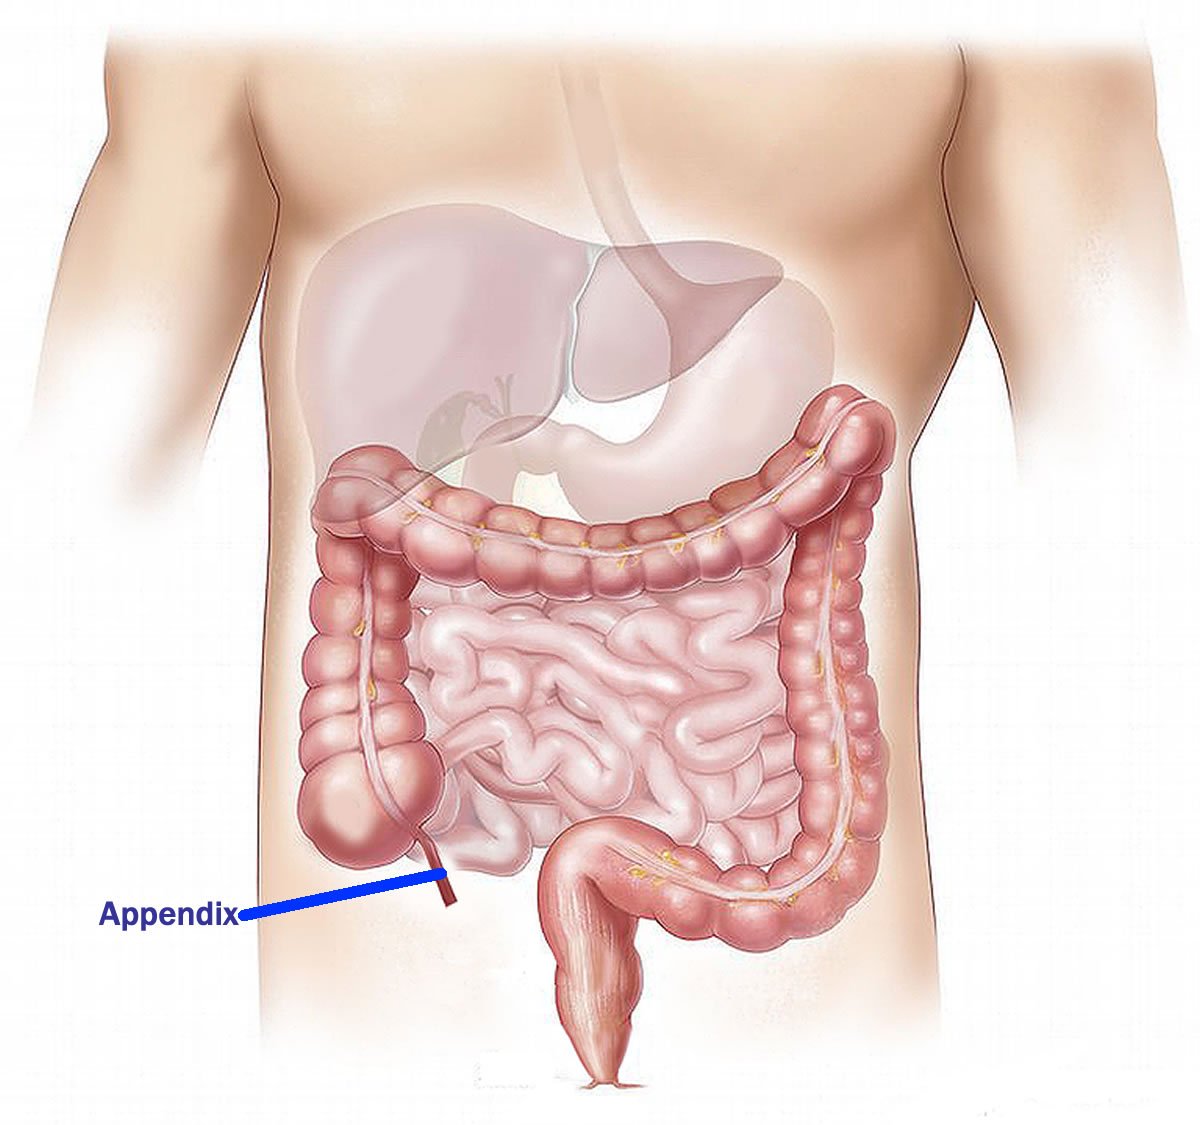 This is a diagram of the intestinal tract with the appendix labeled